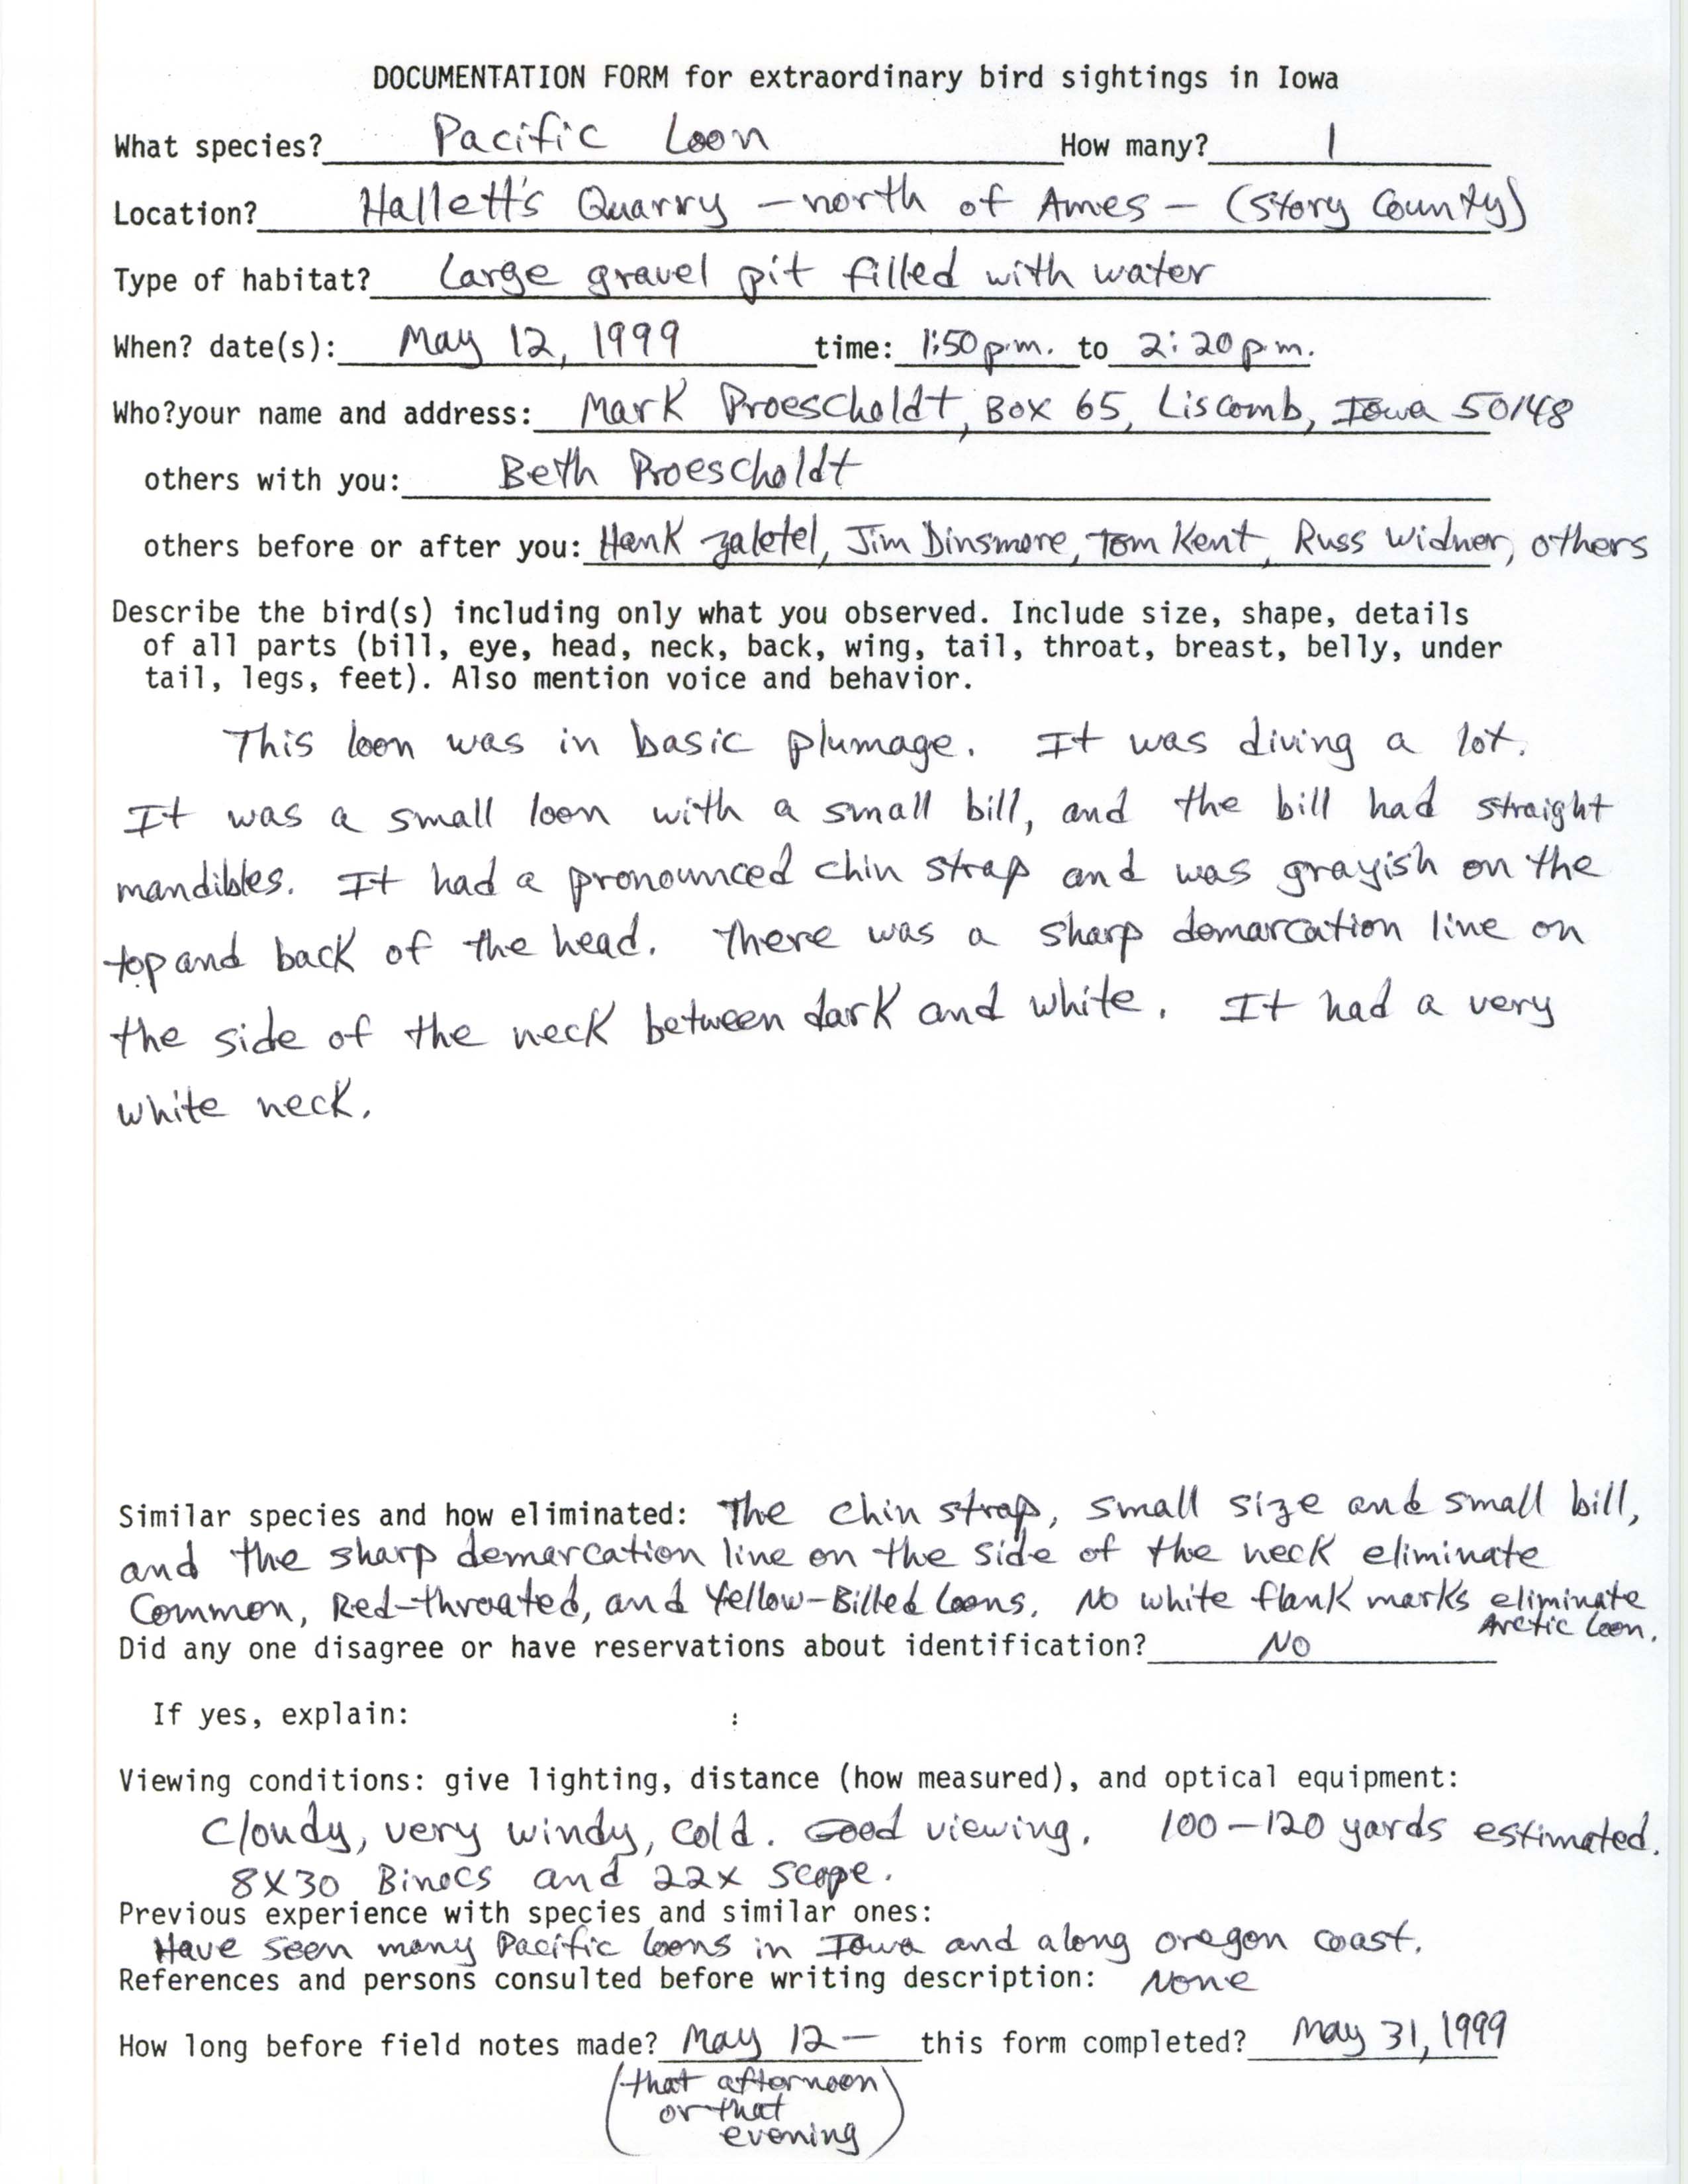 Rare bird documentation form for Pacific Loon at Hallett's Quarry at Ames, 1999